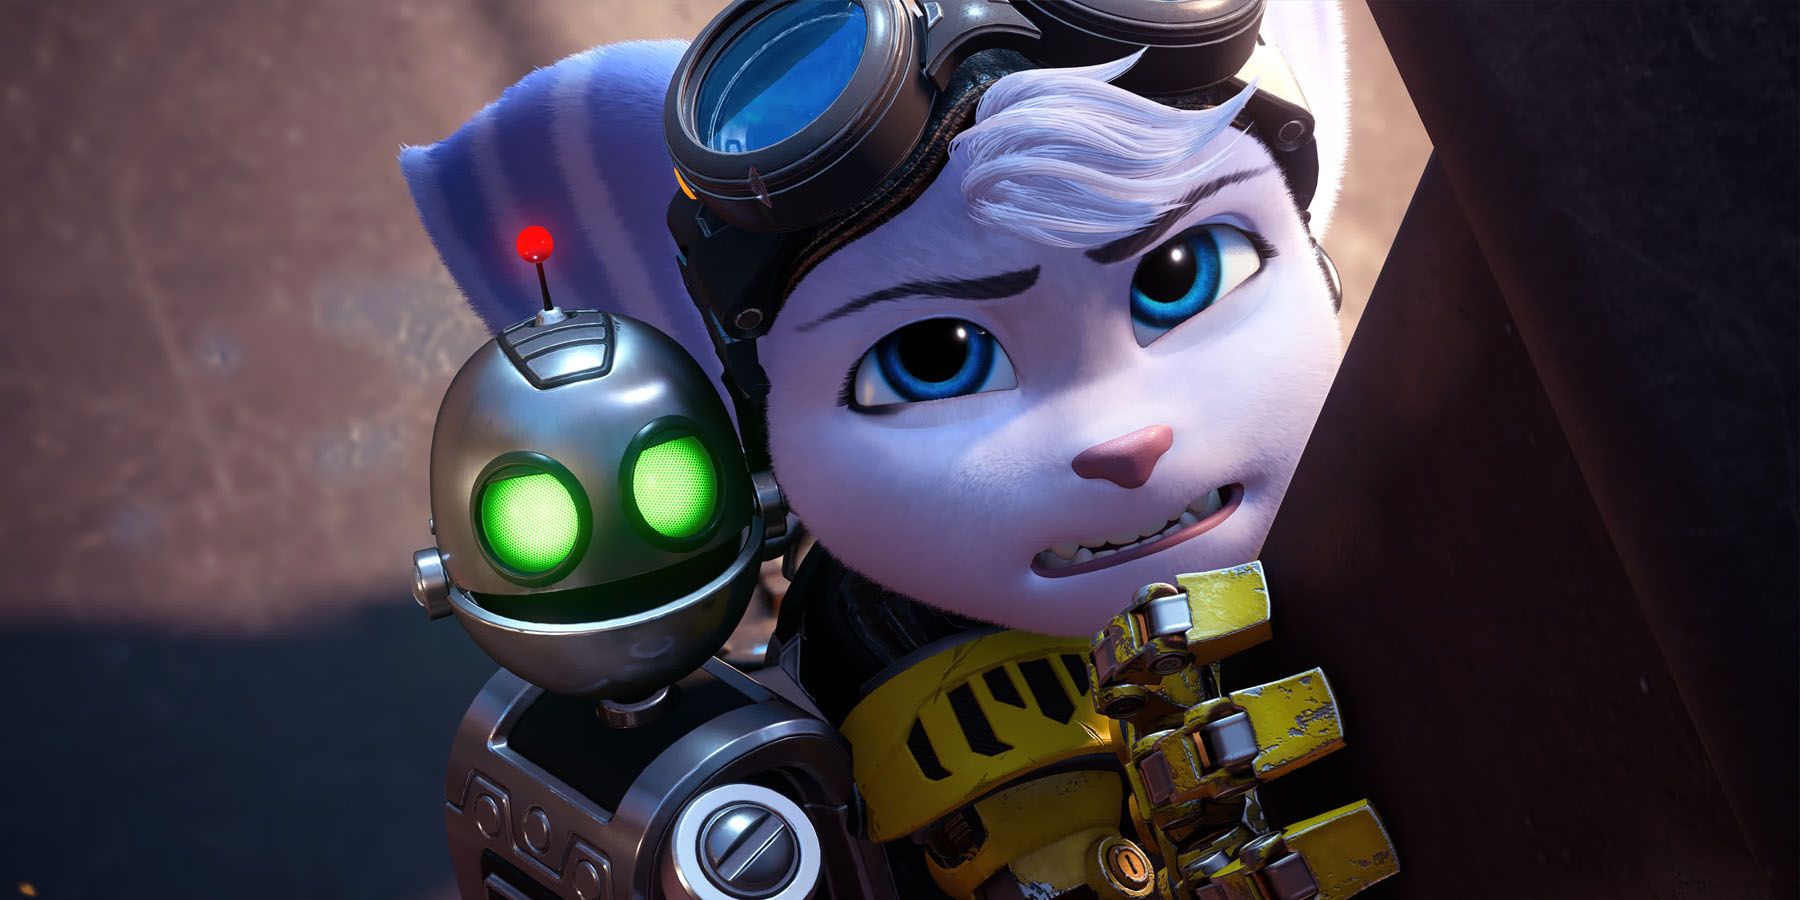 A screenshot of Rivet and Clank looking with concern in Ratchet and Clank: Rift Apart.